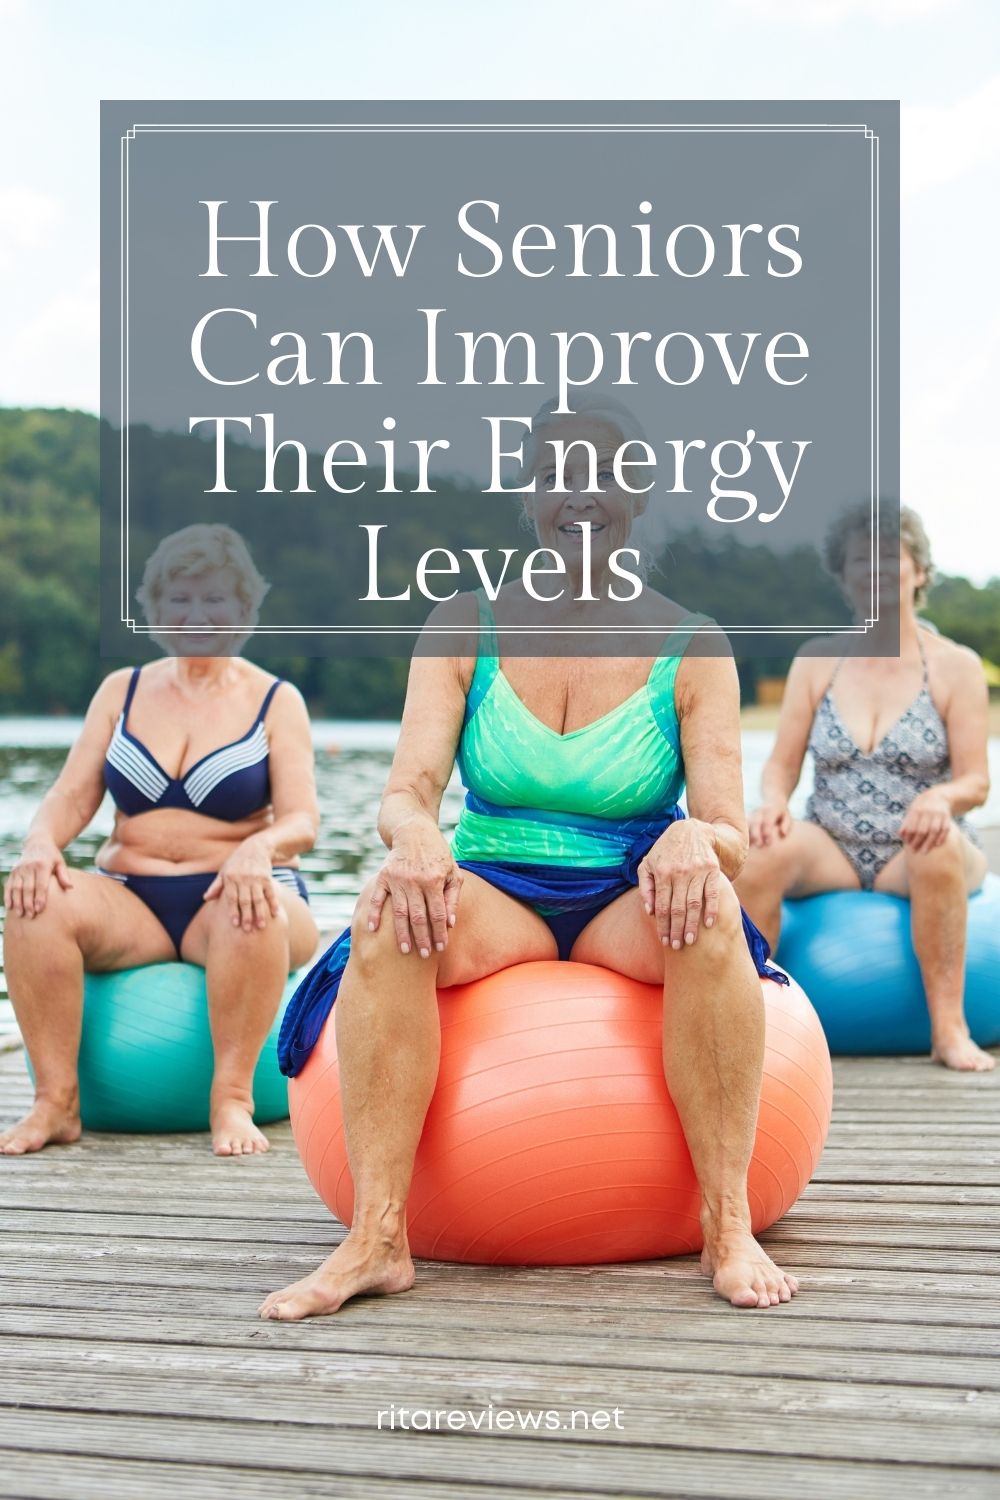 How Seniors Can Improve Their Energy Levels